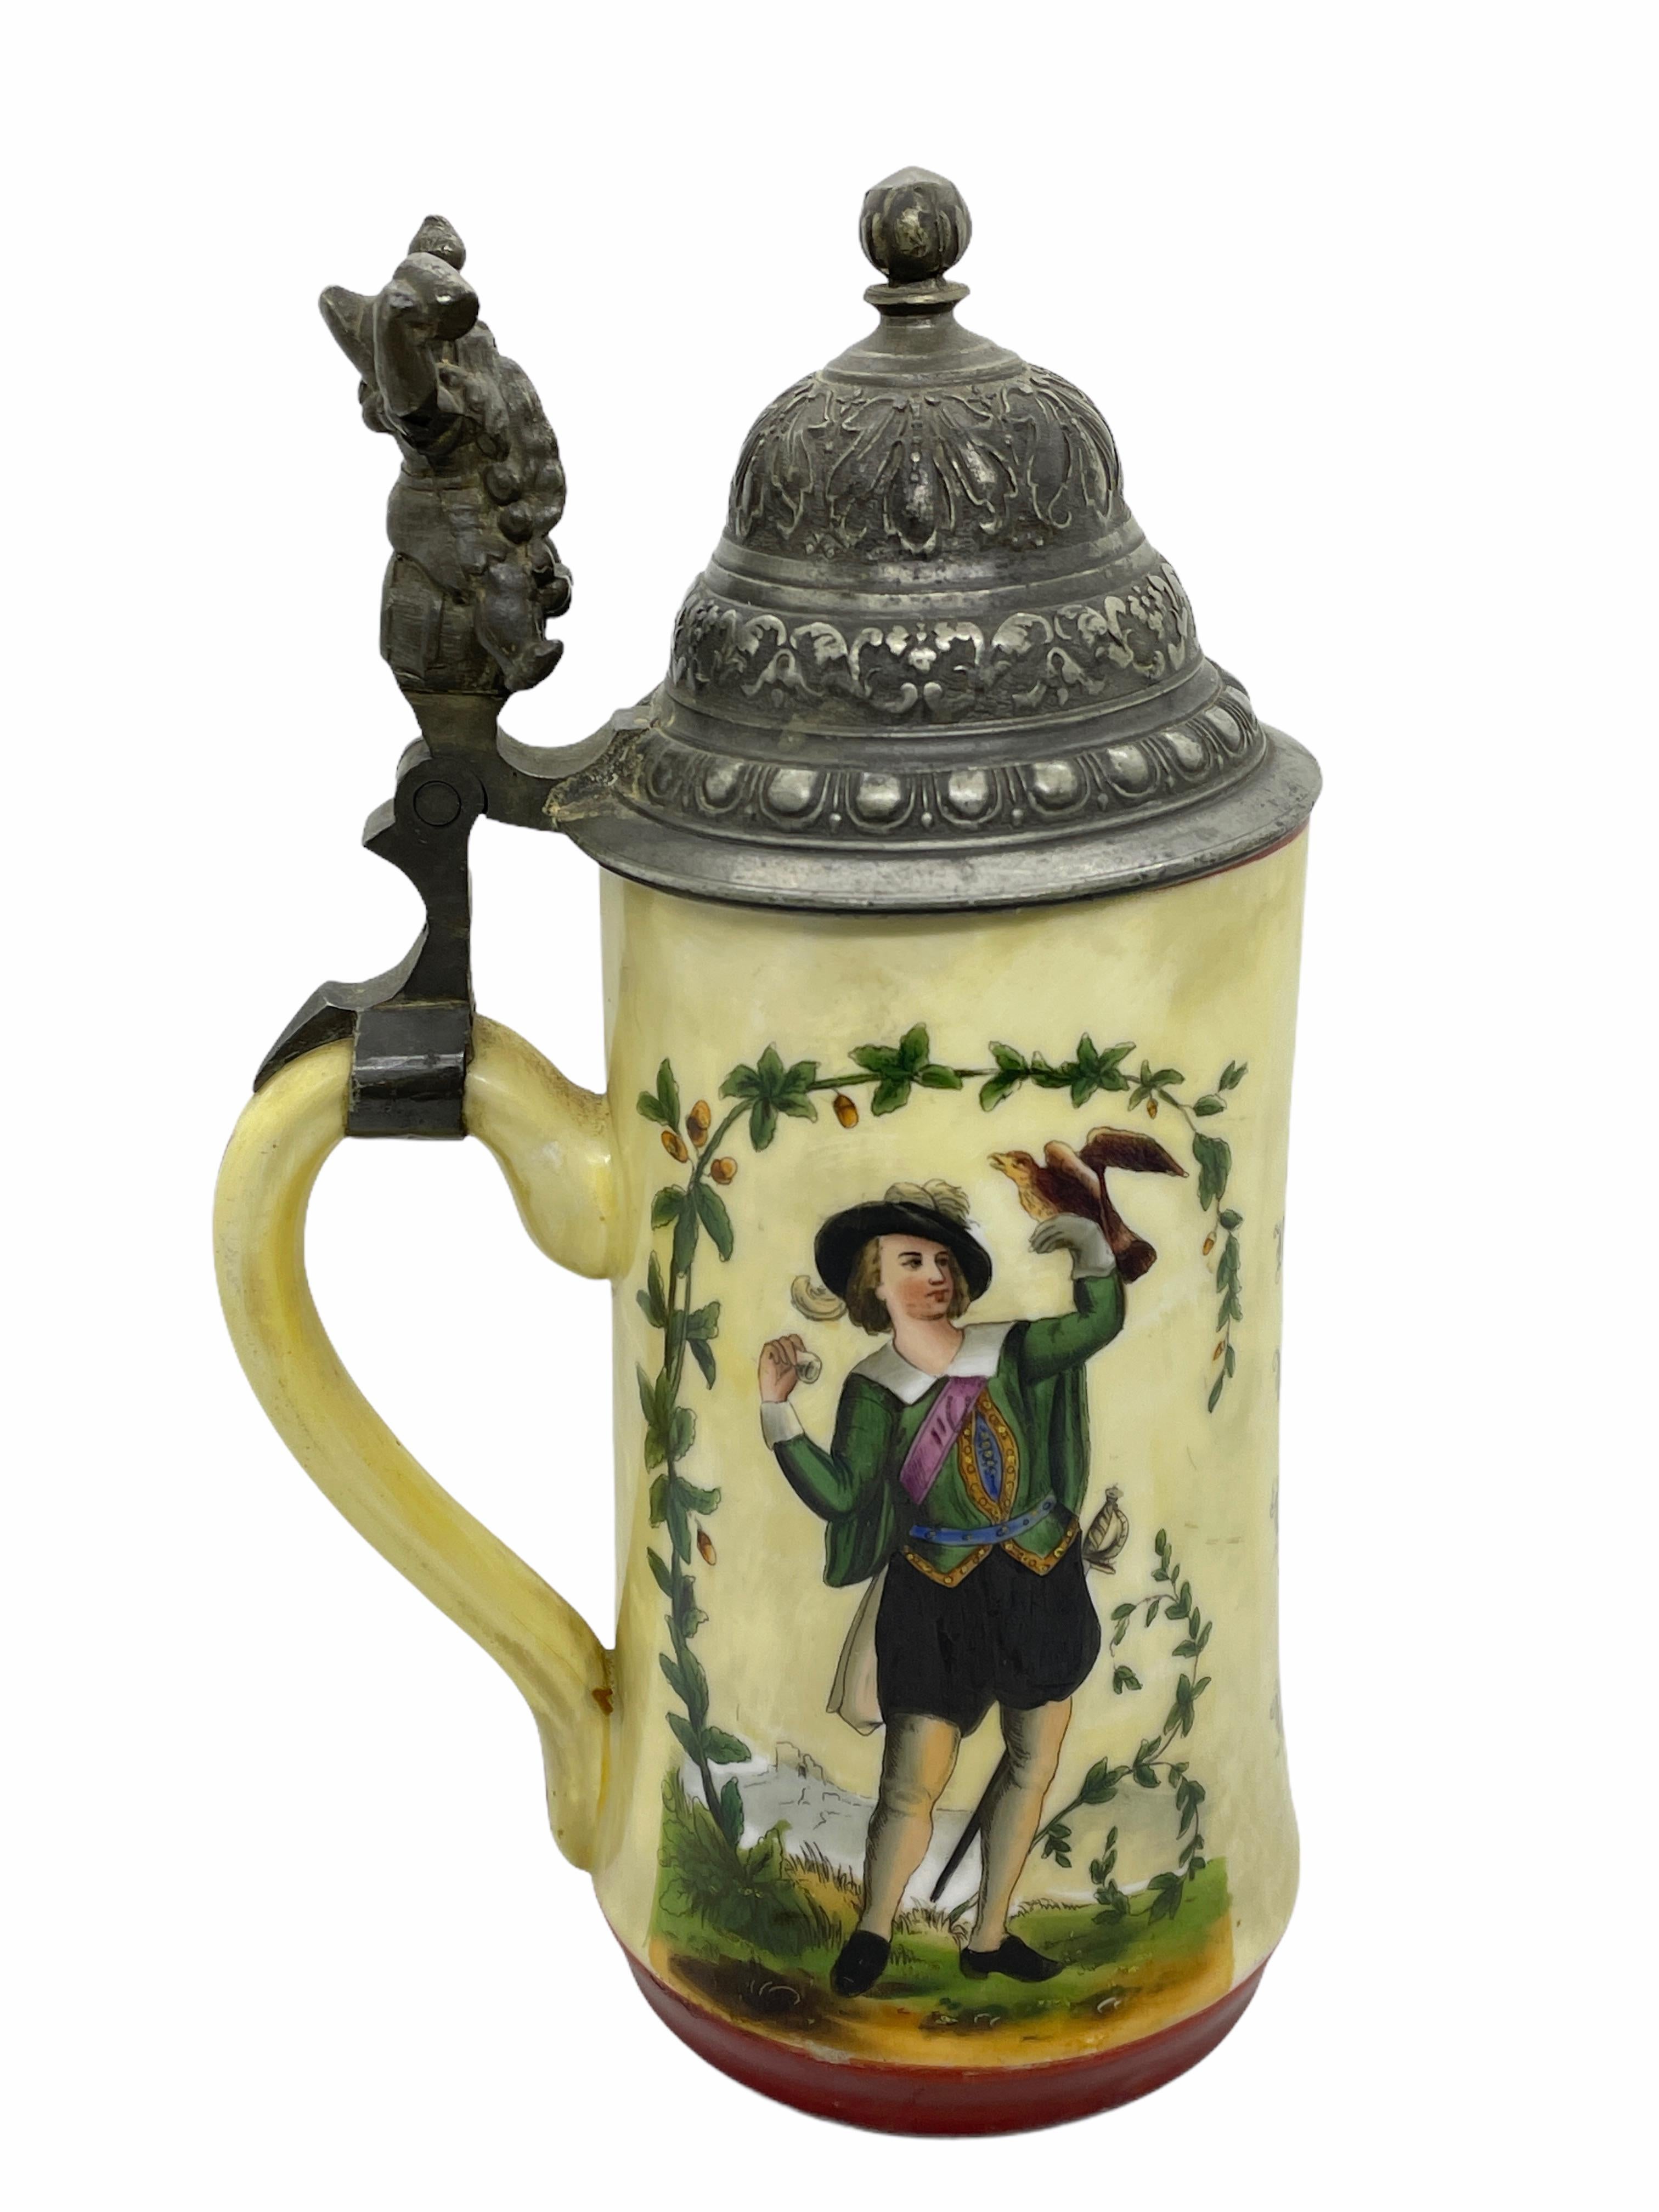 A gorgeous beer stein, made in Germany. This beer stein has been made in Germany, circa 1900s or older. Absolutely gorgeous piece still in great condition, without damage. Lid works properly. It is a 1/2 Liter Stein. Has a beautiful detailed Gnome